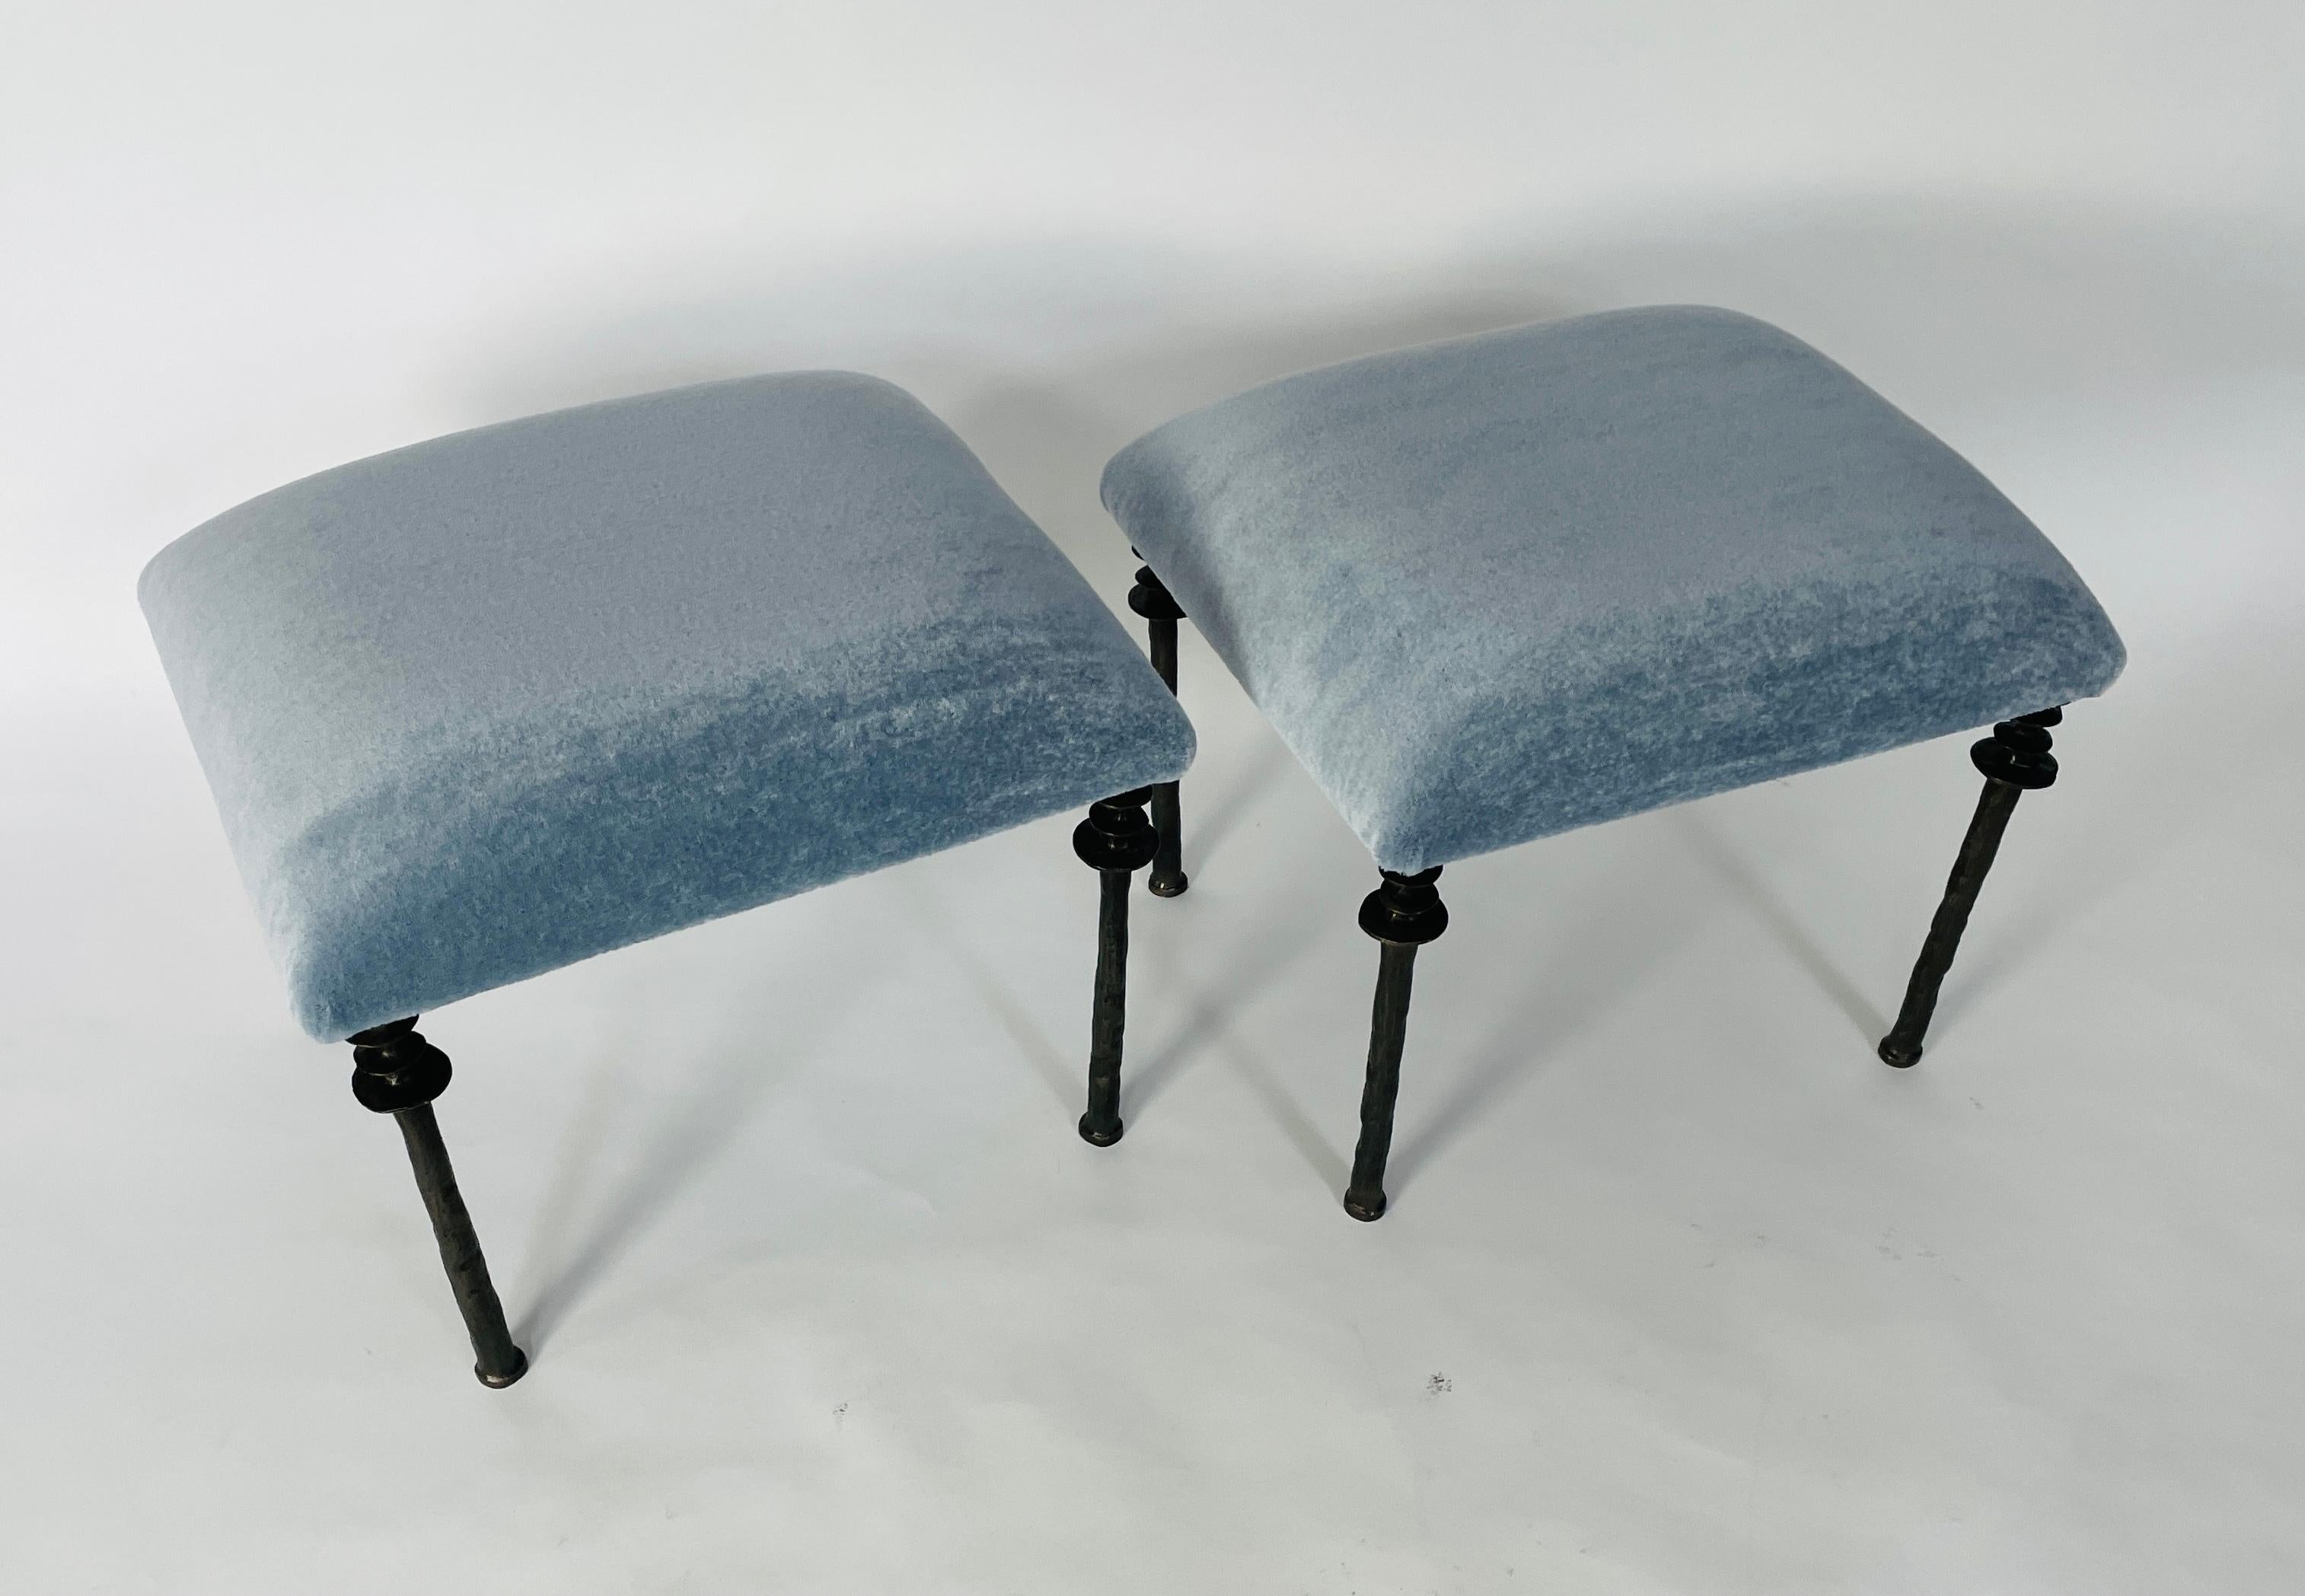 Two beautiful stools inspired by Diego Giacometti, these stools are ideal for those who are looking for unique seating. Their cast bronze legs provide a truly organic touch. The seat cushion has been upholstered with a light blue mohair fabric.